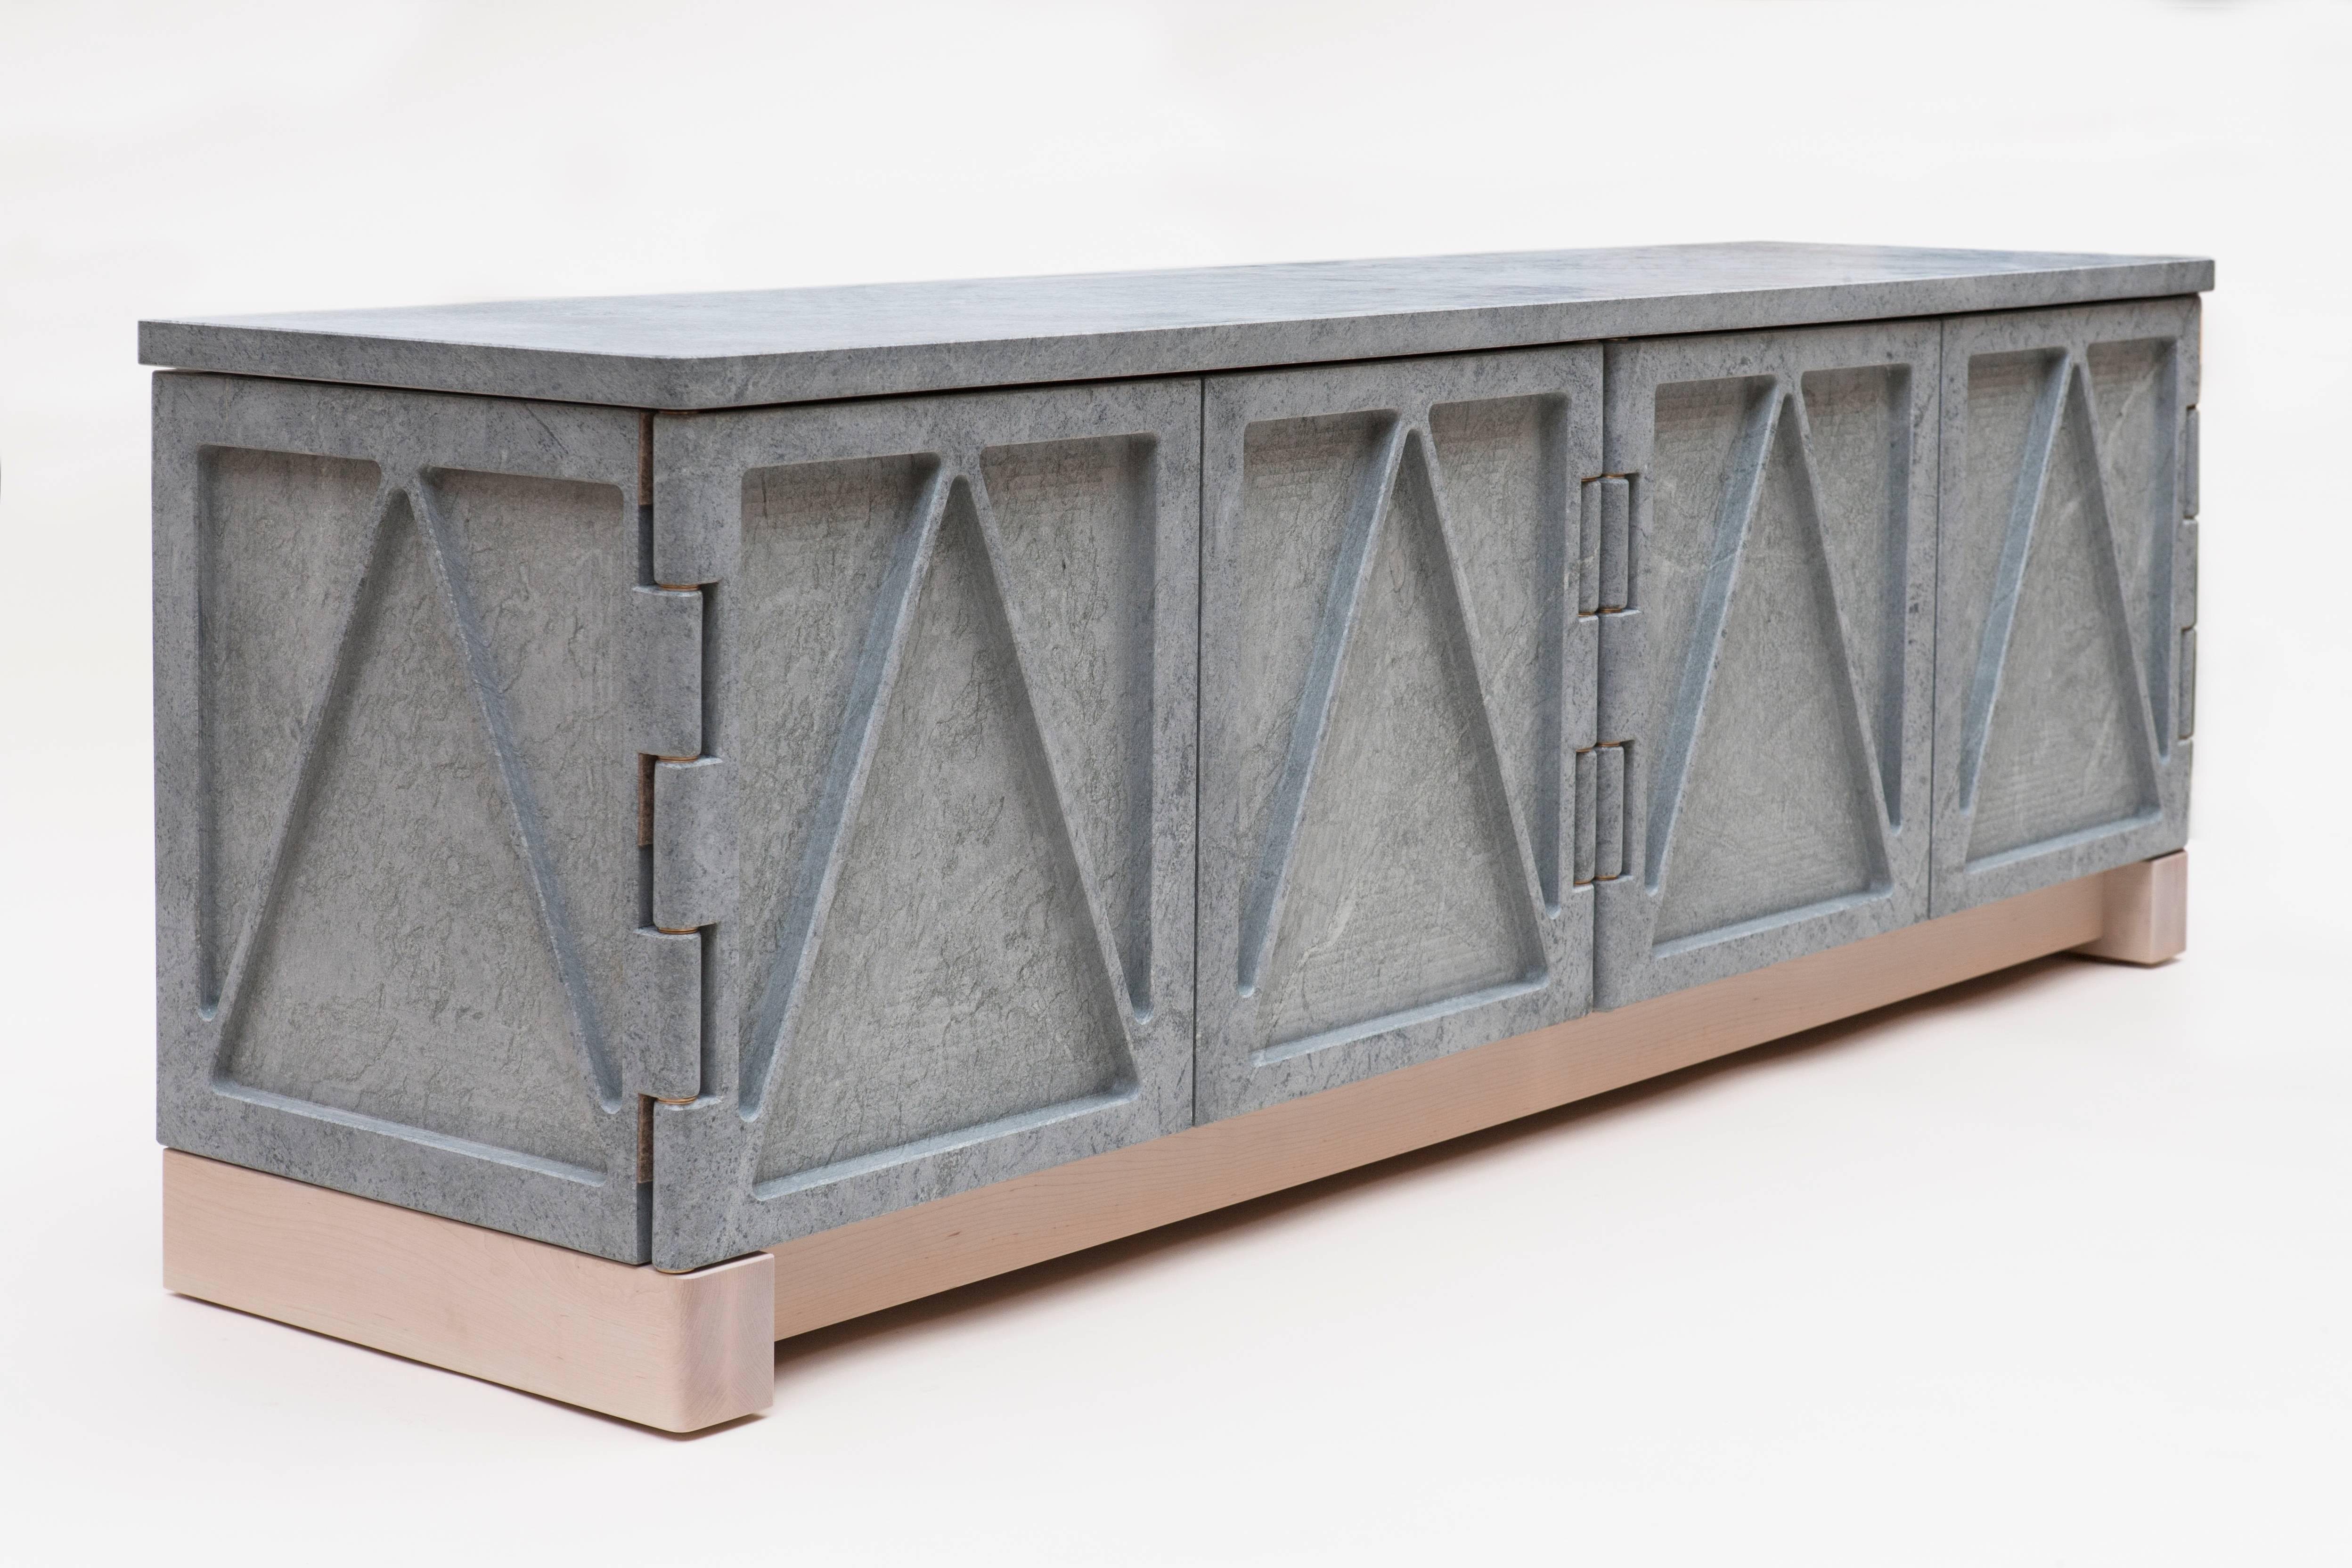 A part of the “Qualities of Material” collection, this stone credenza has a triangular relief pattern milled into the exterior panels, which removes excess weight and allows the remaining ribs to retain the material’s strength. The soapstone cabinet